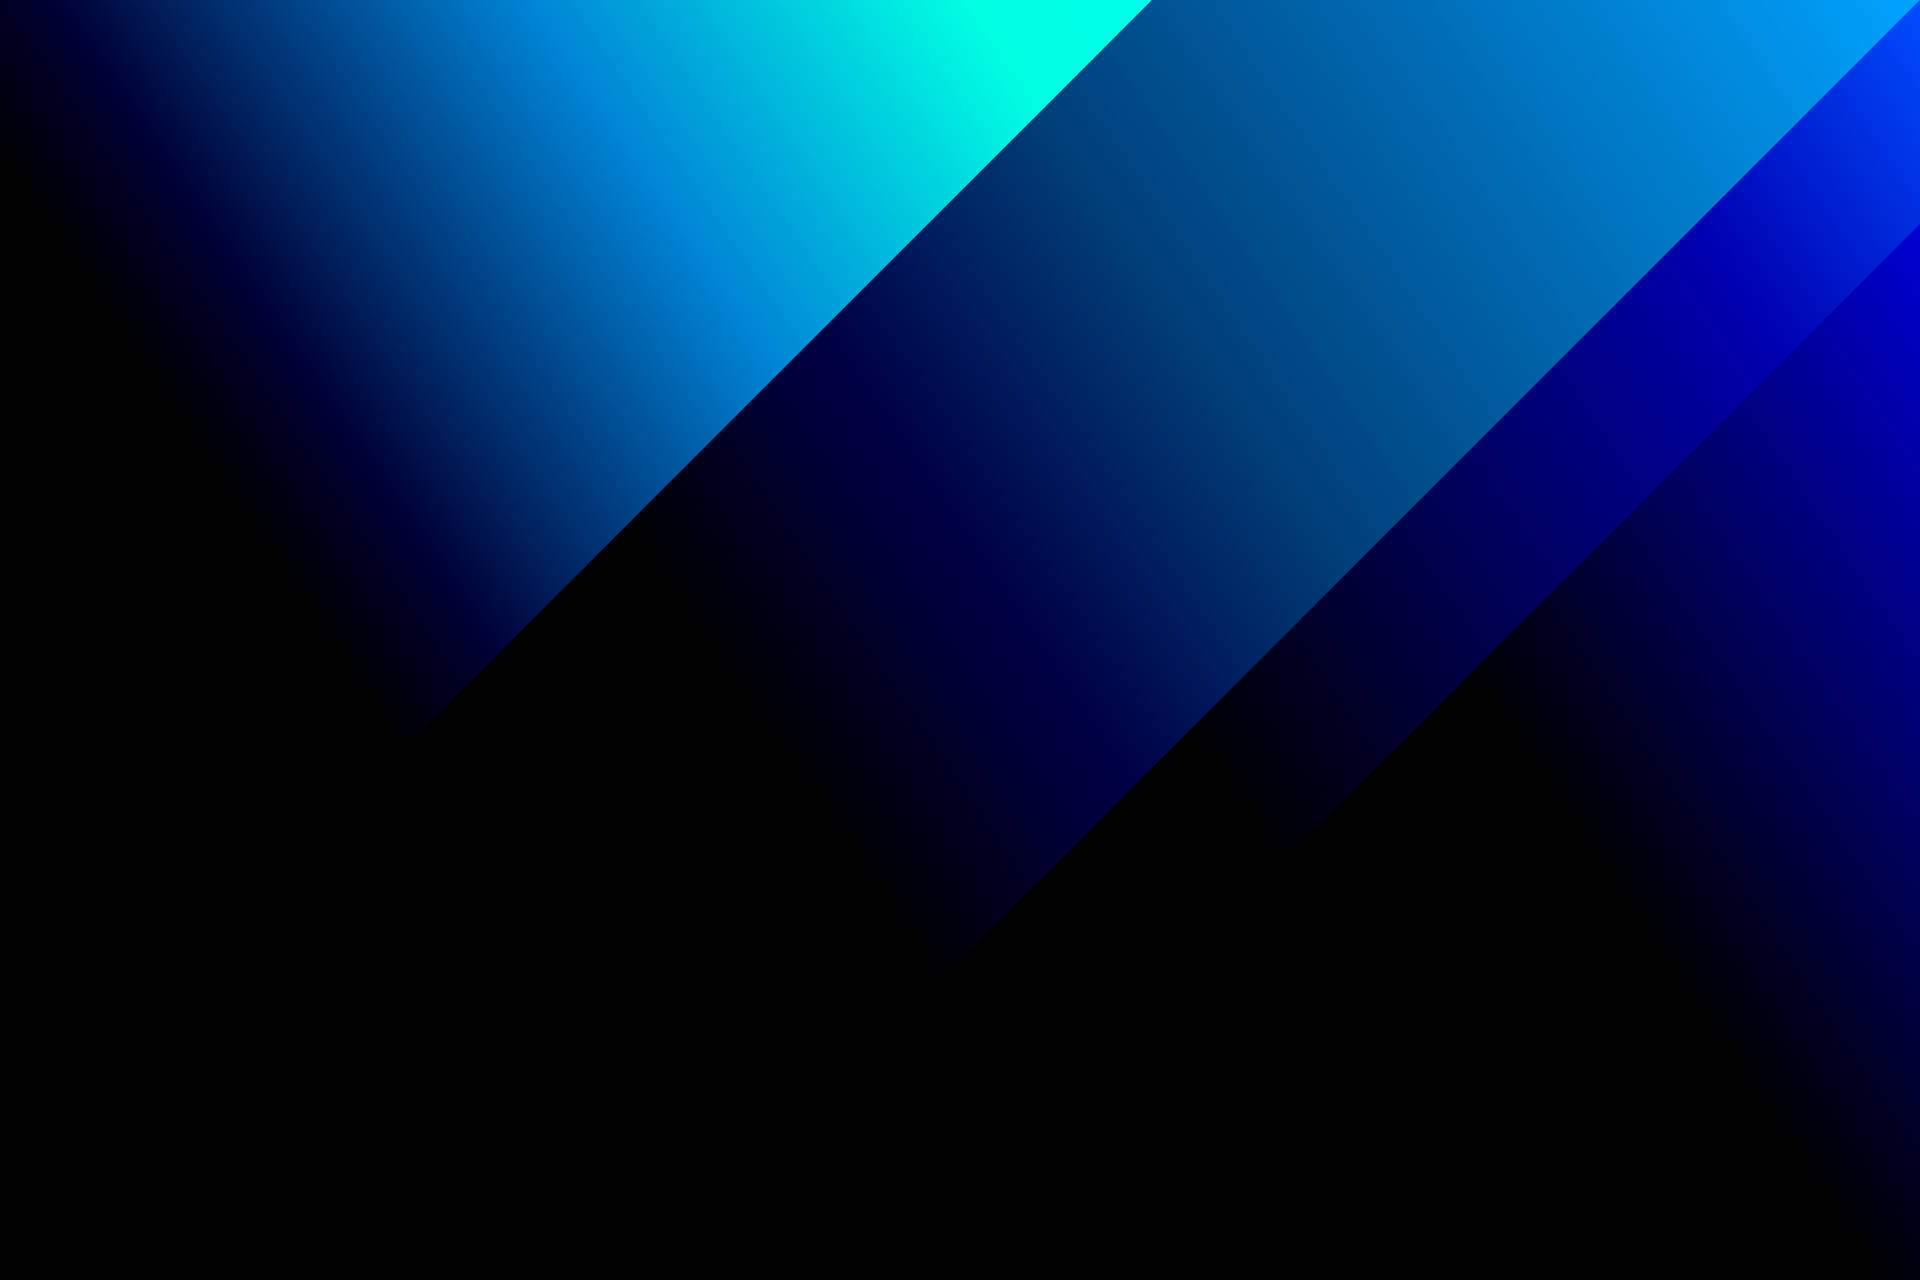 Solid Dark Blue And Black Vector Background